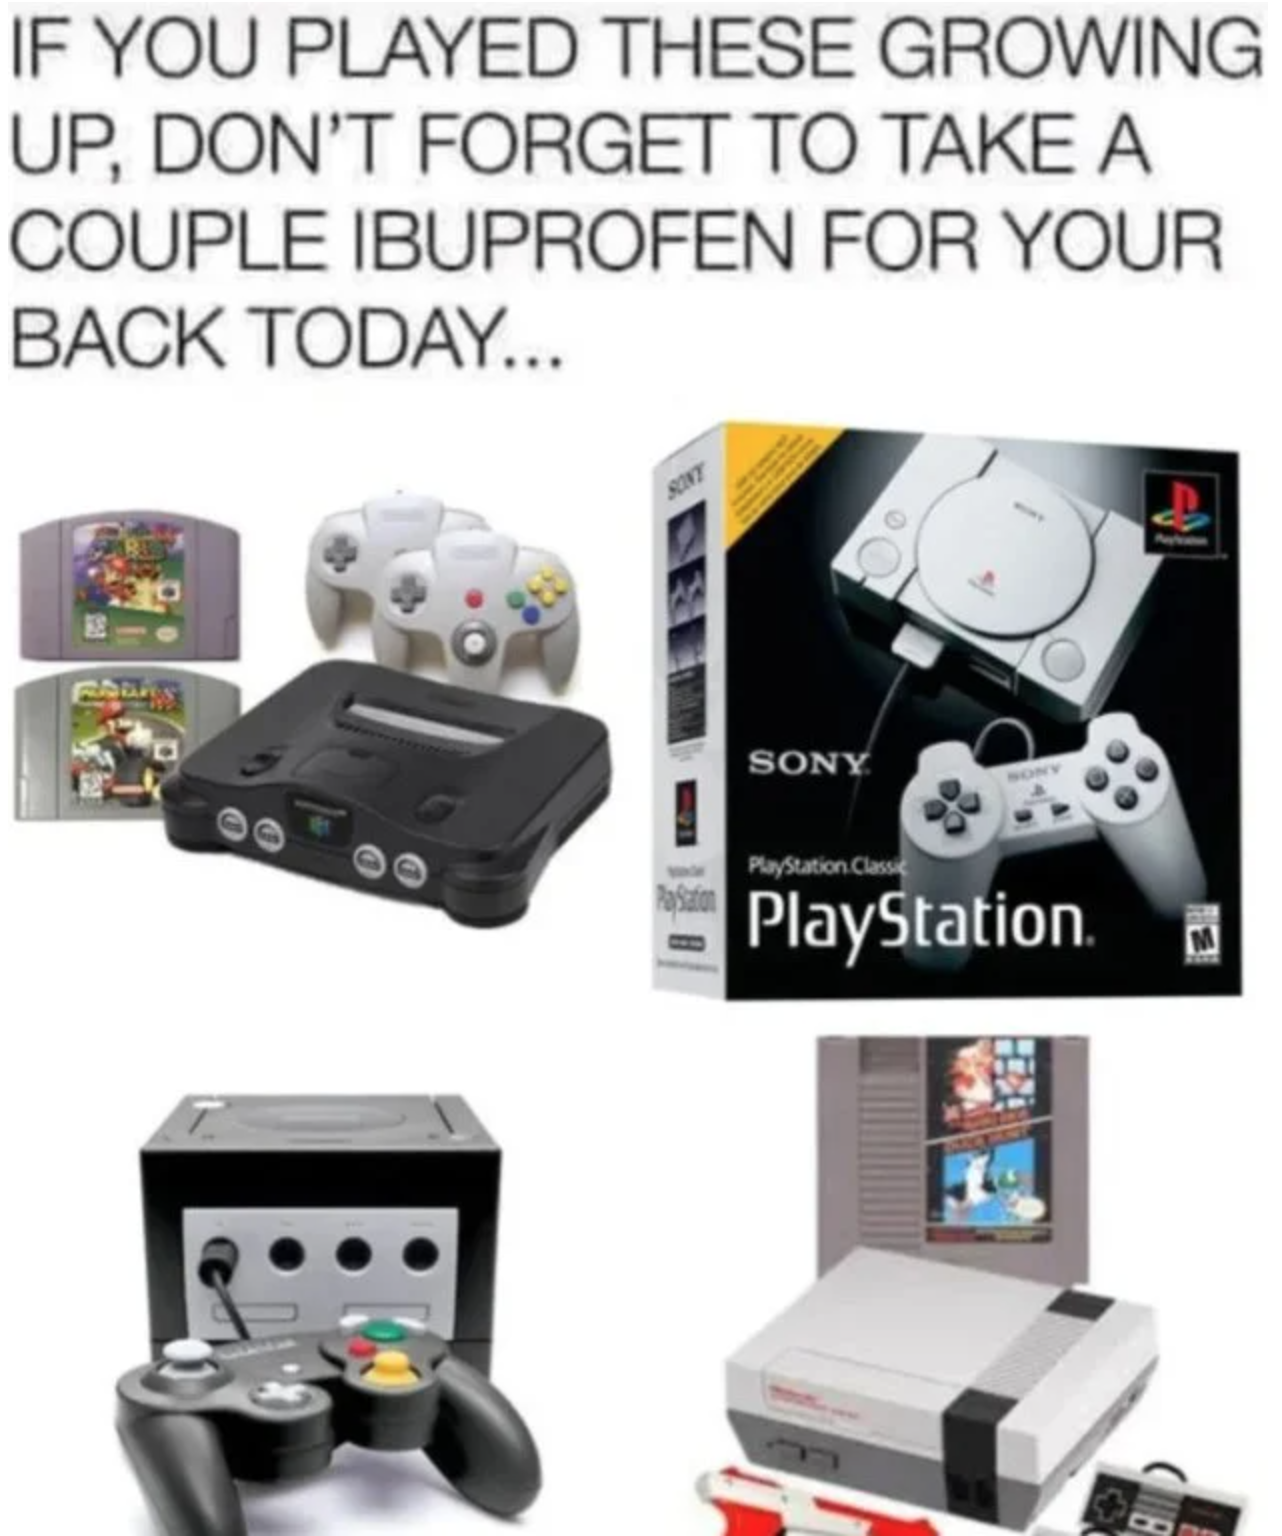 funny gaming memes - PlayStation Classic - If You Played These Growing Up, Don'T Forget To Take A Couple Ibuprofen For Your Back Today... Sony PlayStation